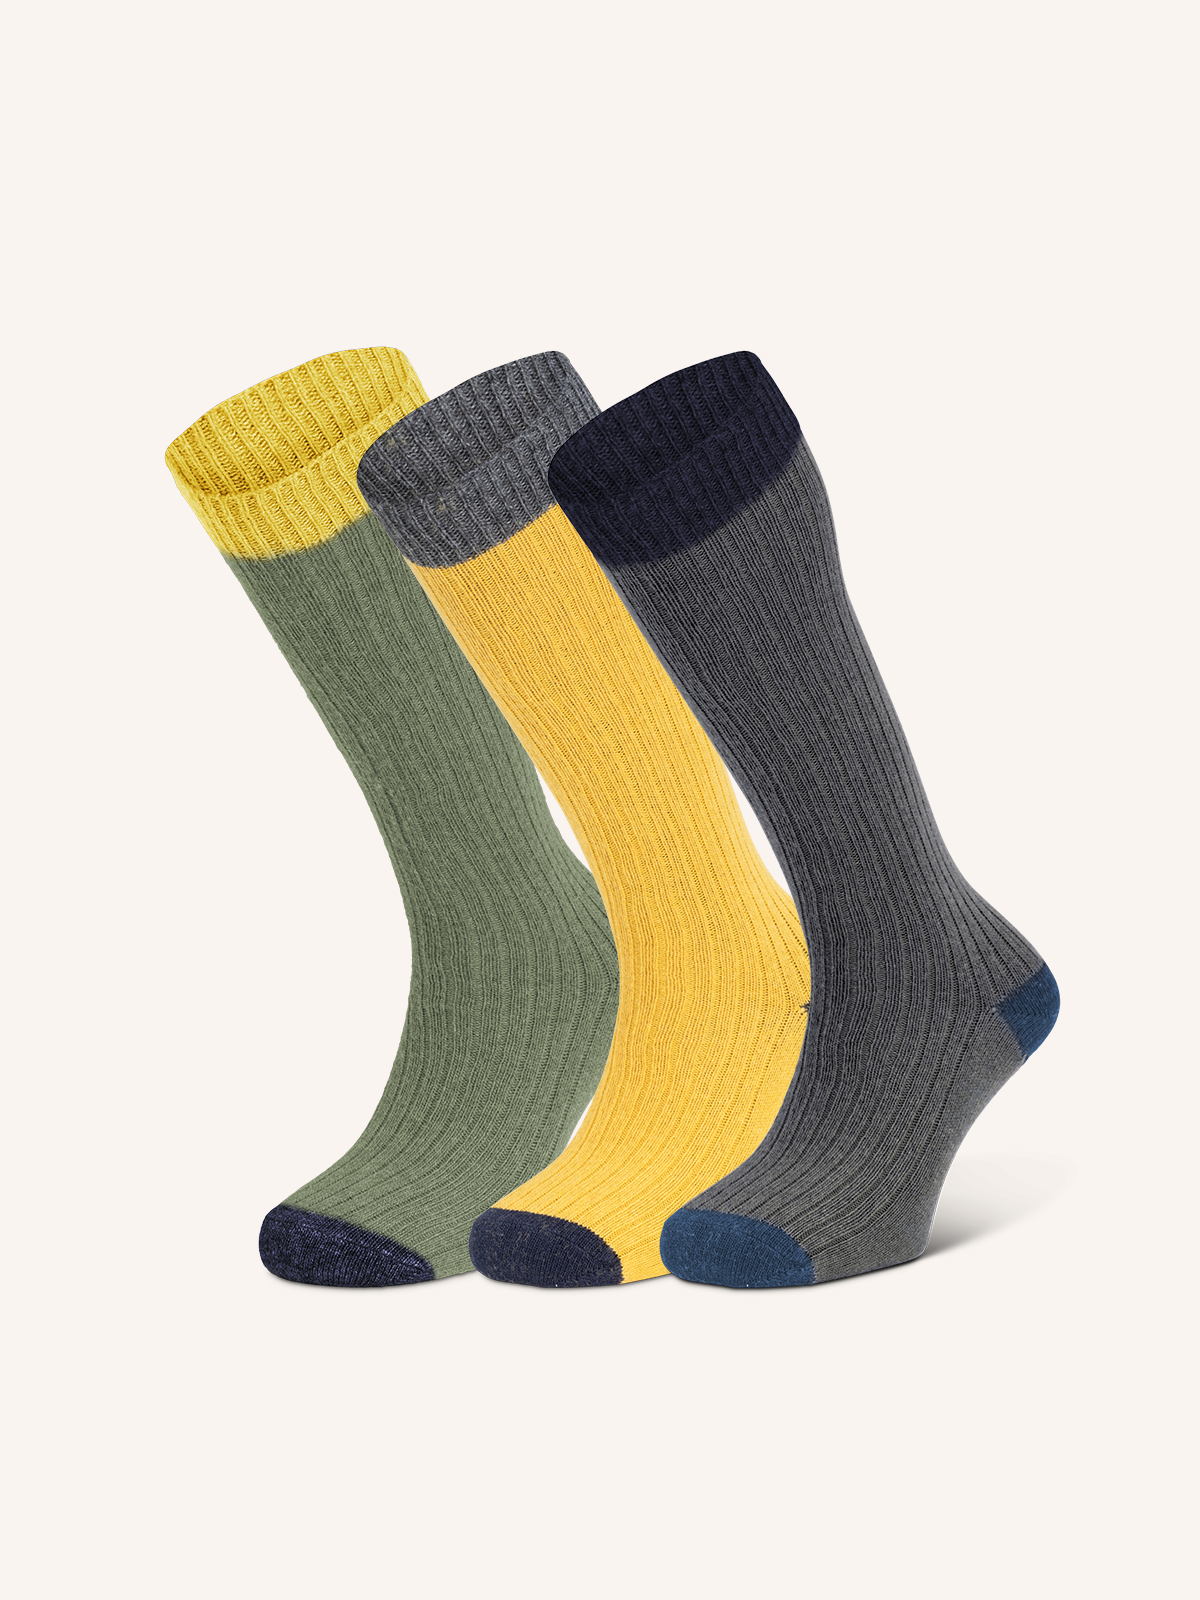 Long socks in Cashmere and Wool blend for Men | Plain Color | Pack of 3 Pairs | Cachelife UL